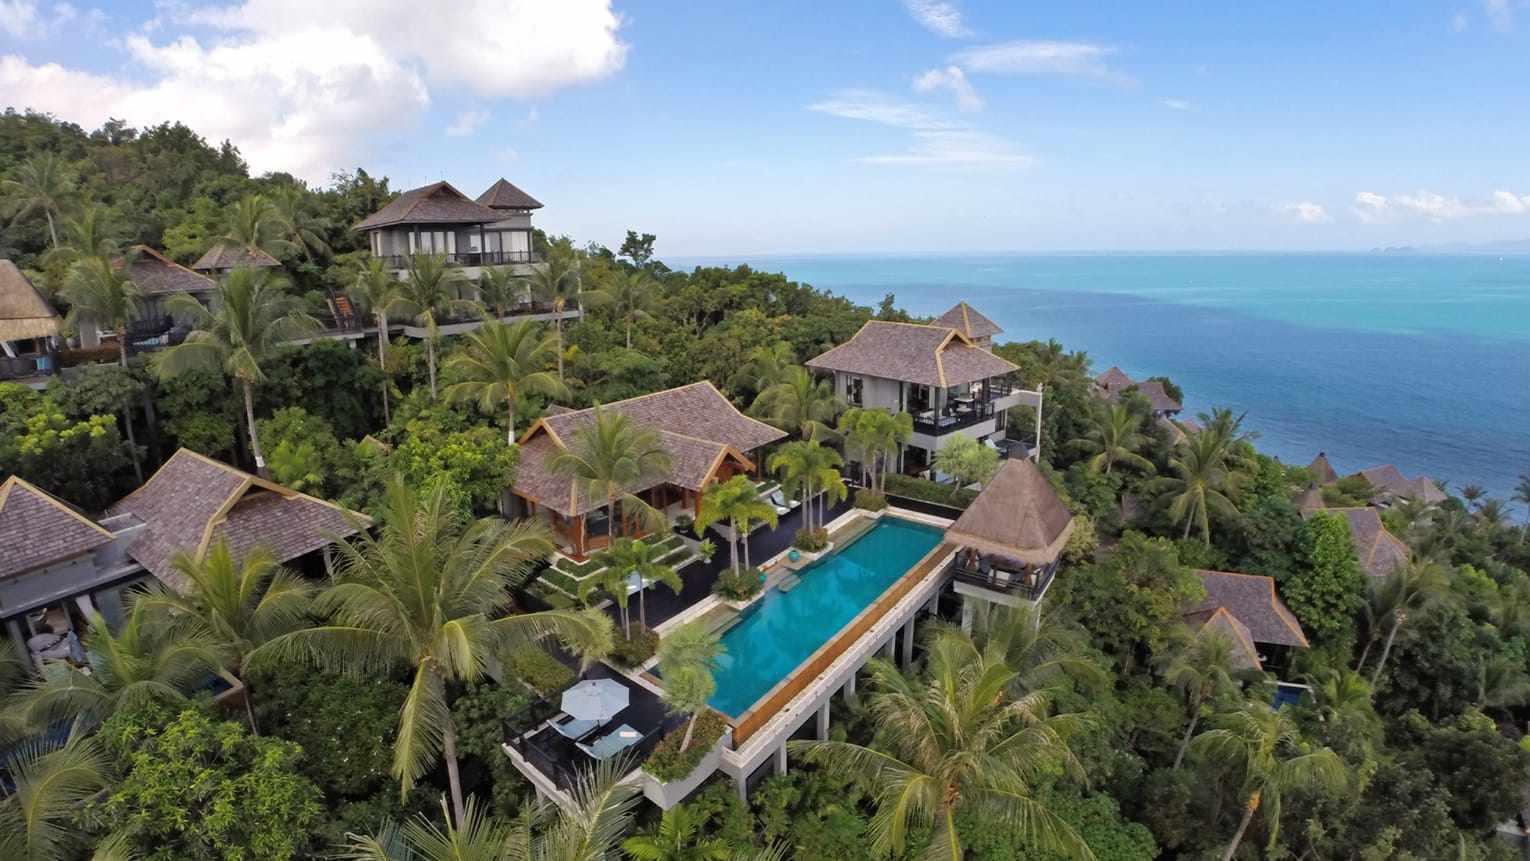 The White Lotus has wrapped filming in Thailand, and tour operators and the country’s hotels, like the Four Seasons Resort Koh Samui (pictured), are ready for a bump in tourists. Photo: Four Seasons Resort Koh Samui